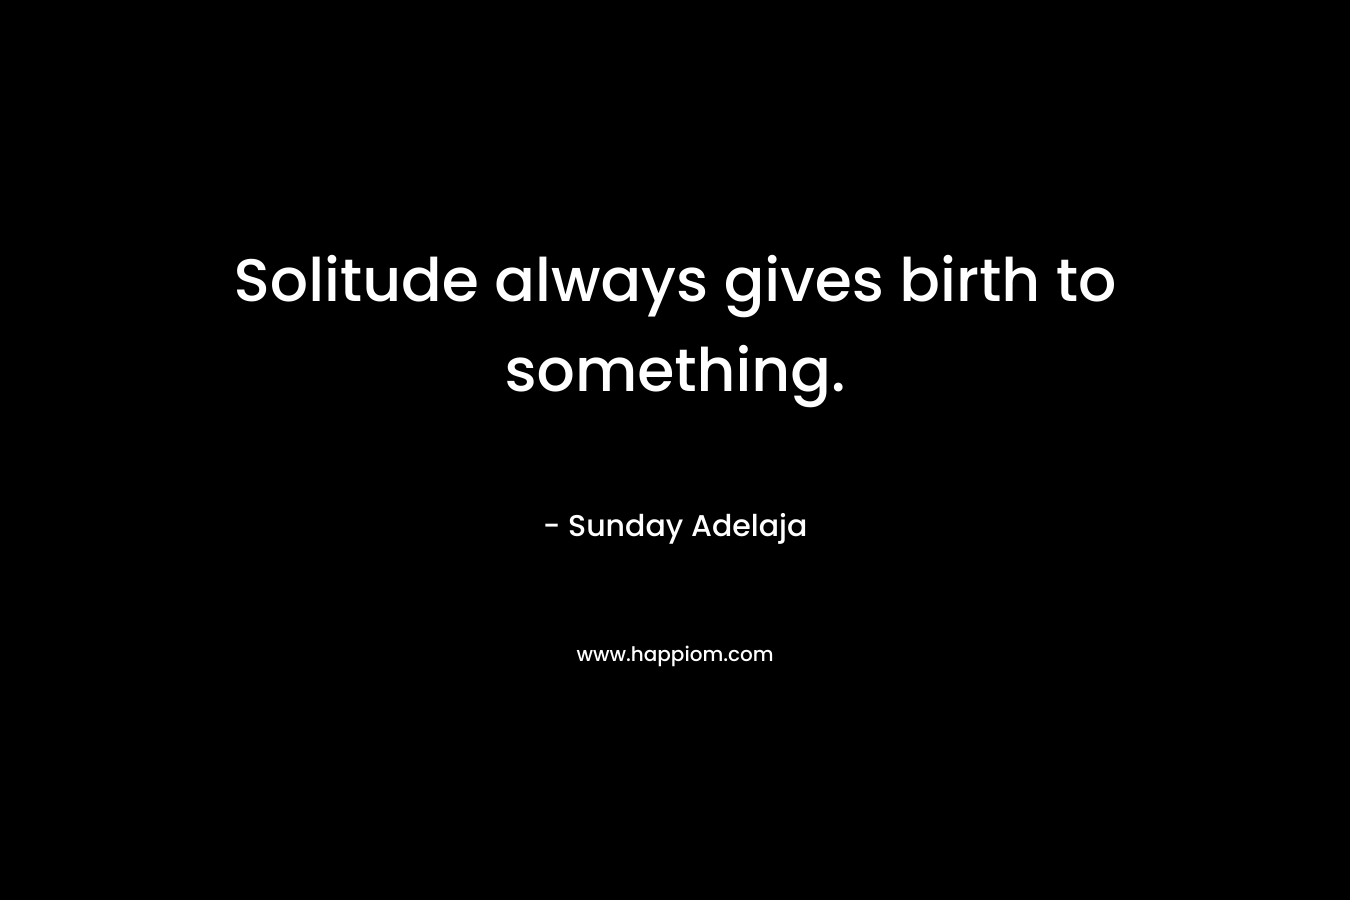 Solitude always gives birth to something.